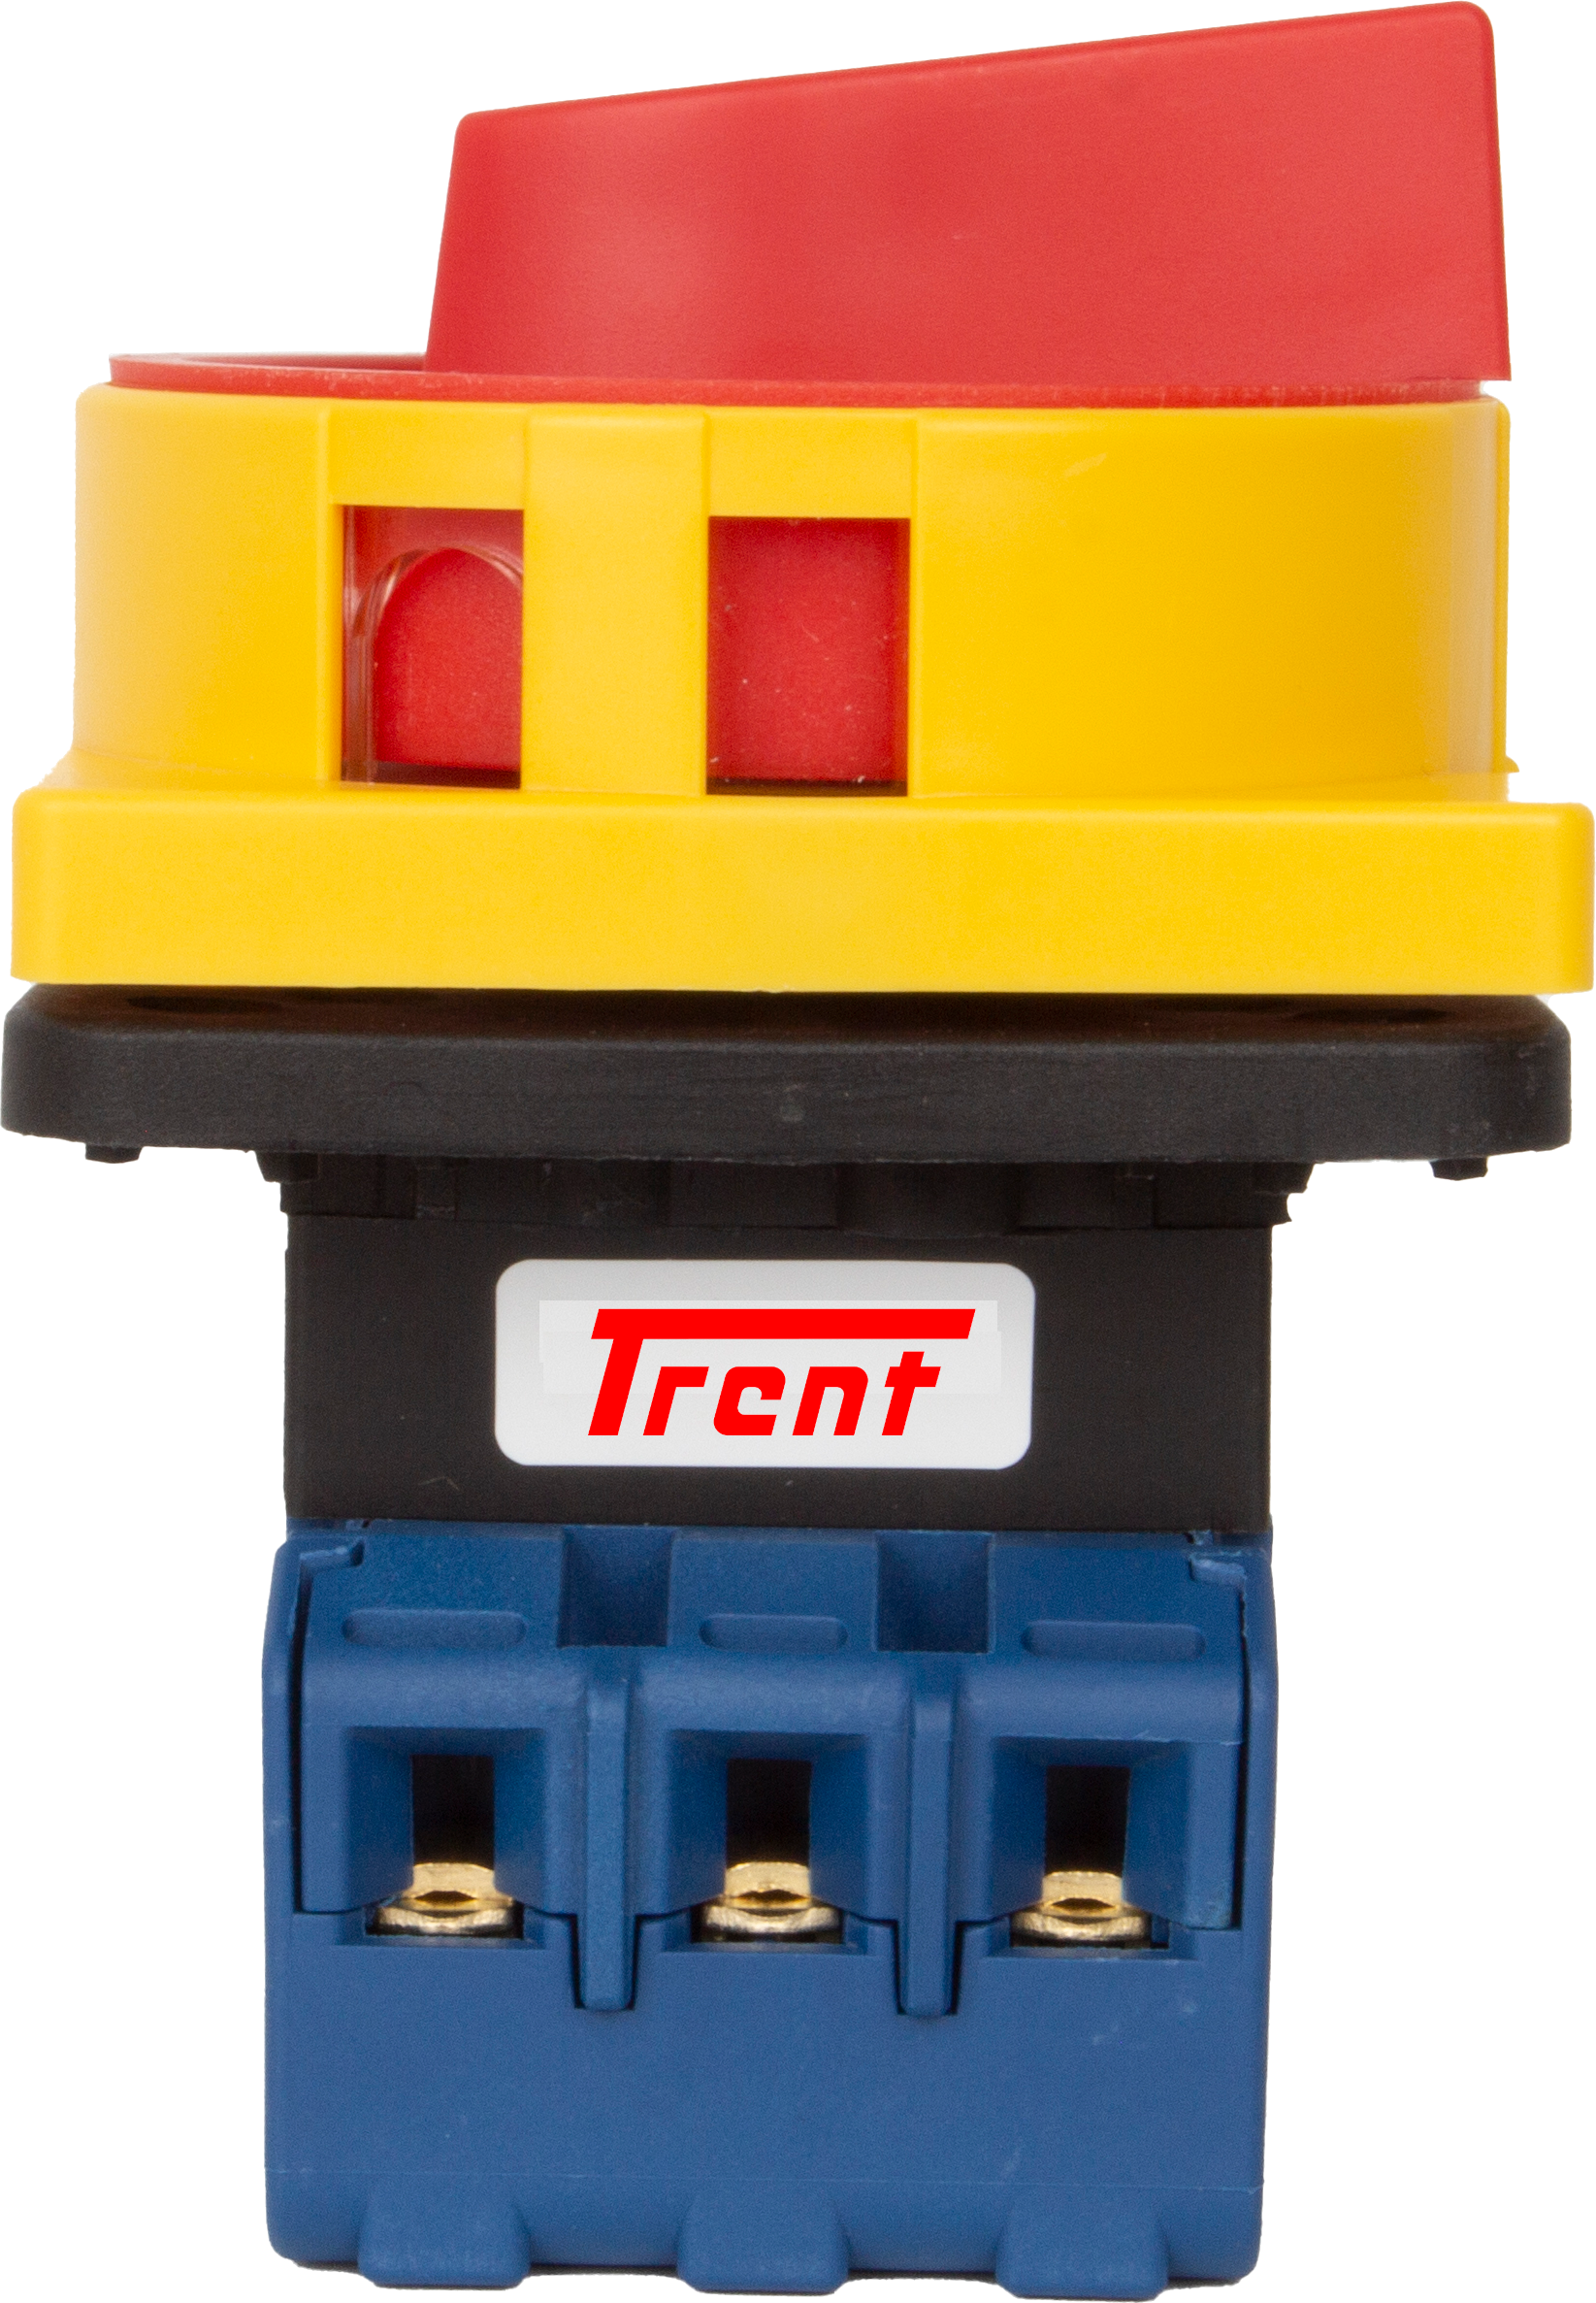 TGLW30-4D100, 4 Pole Rotary/CAM Switch RED, 100 Amp 400VAC, Plastic, Direct Type, IEC60947-5-1